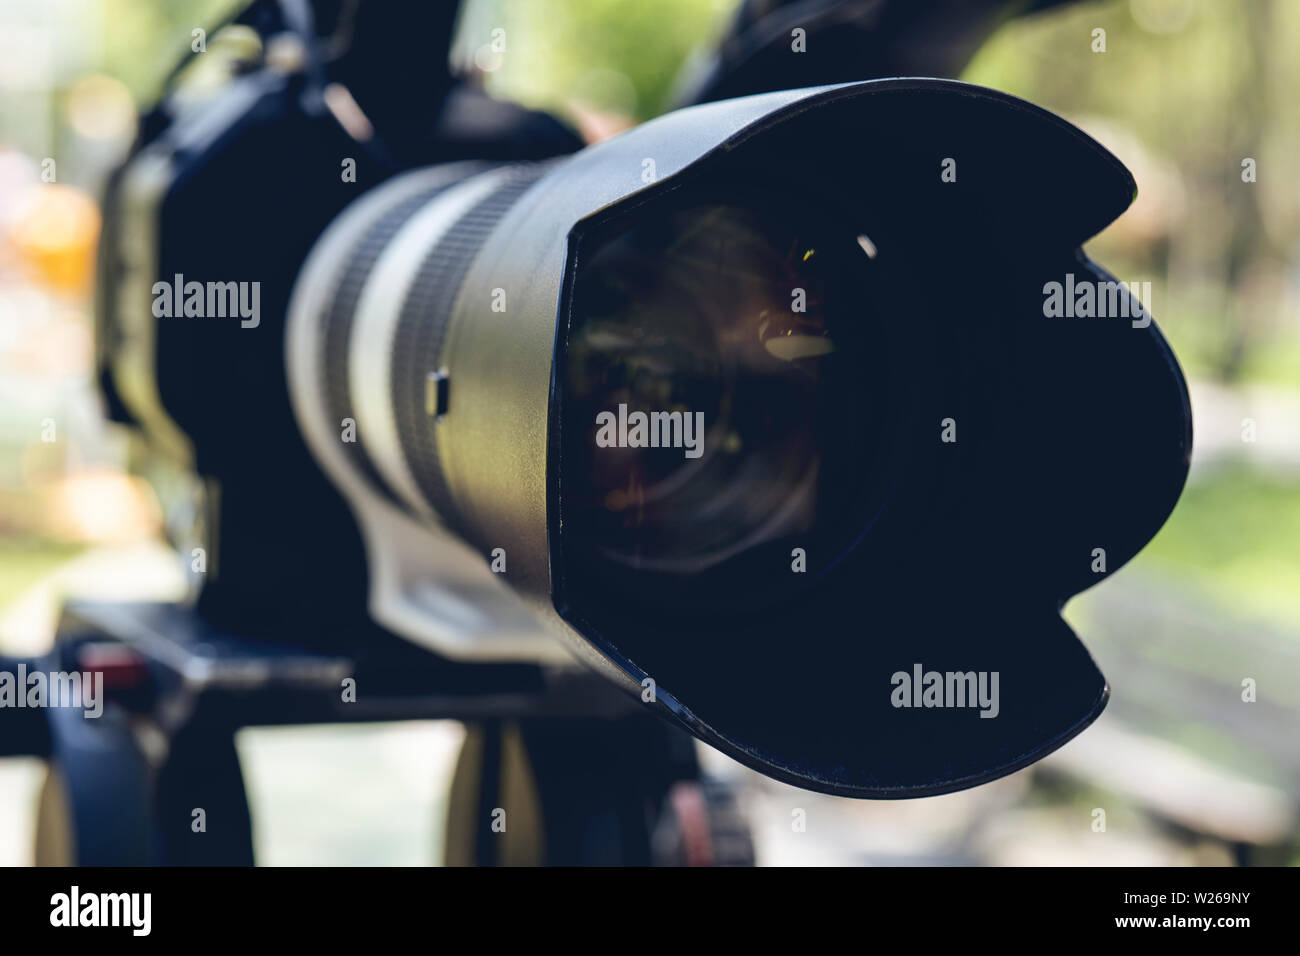 Super close up of Professional Video Camera. The Focus is on the lens and the front part Stock Photo